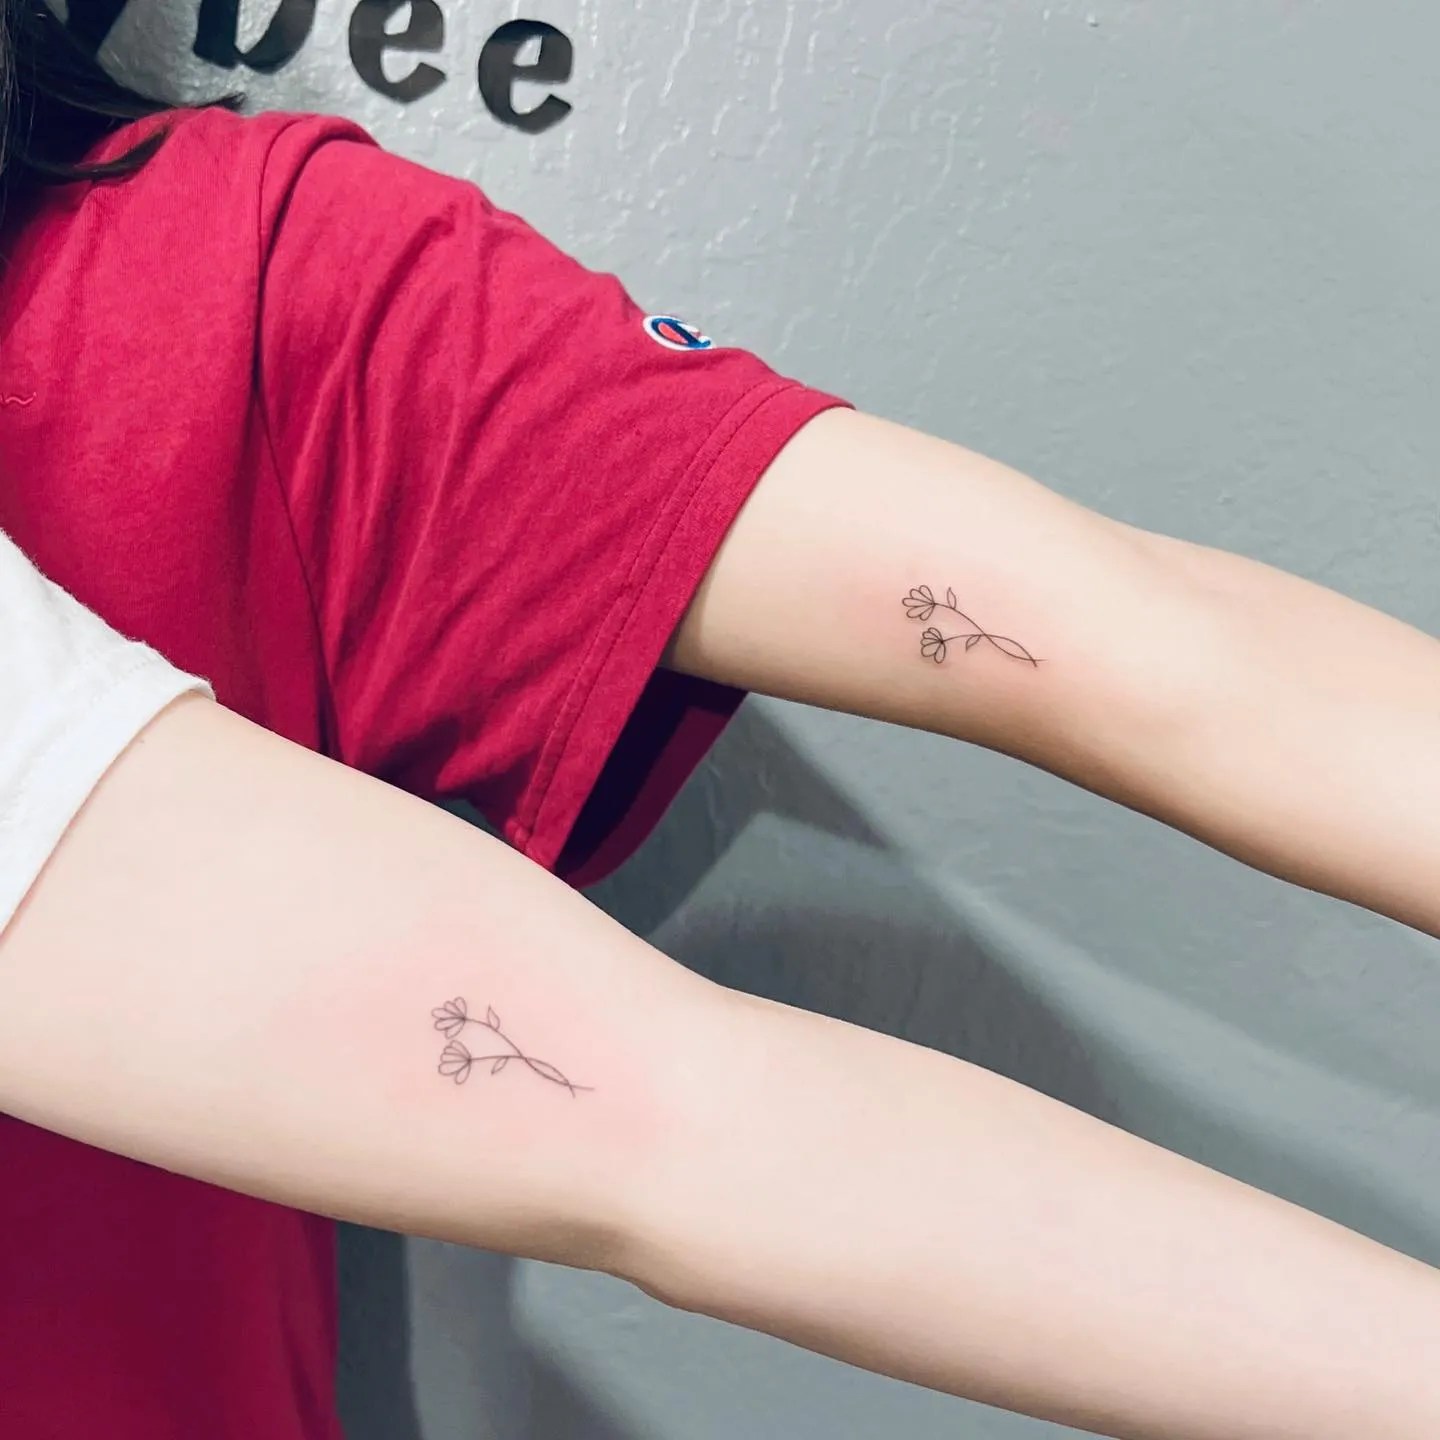 What are some great K-pop tattoo ideas? - Quora